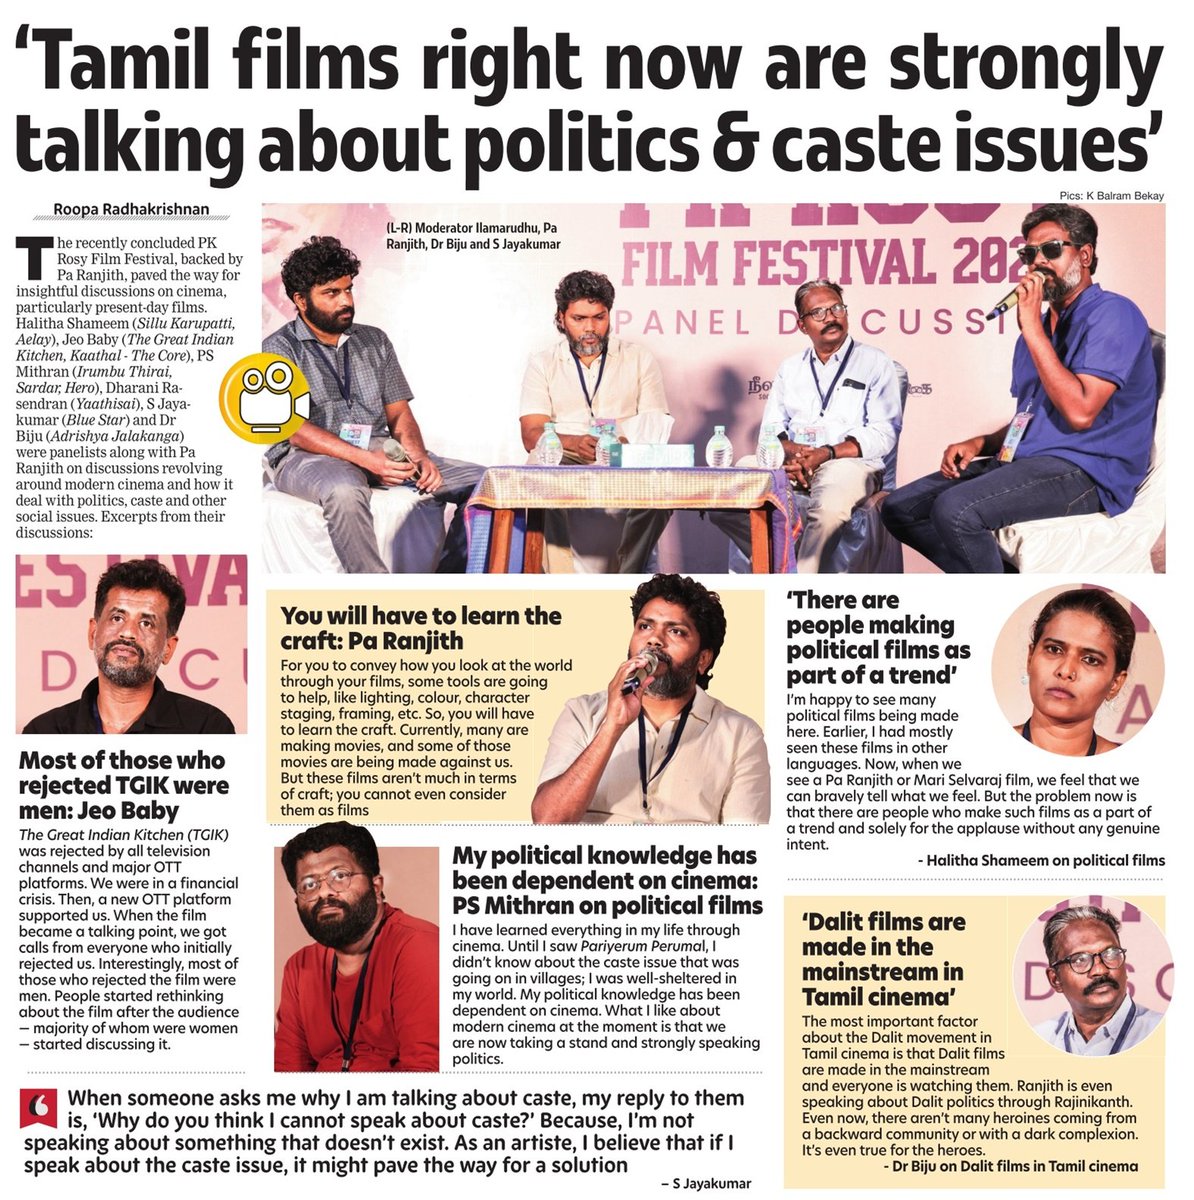 Tamil films right now are strongly talking about politics & caste issues
. 
@beemji #PaRanjith @Psmithran @halithashameem